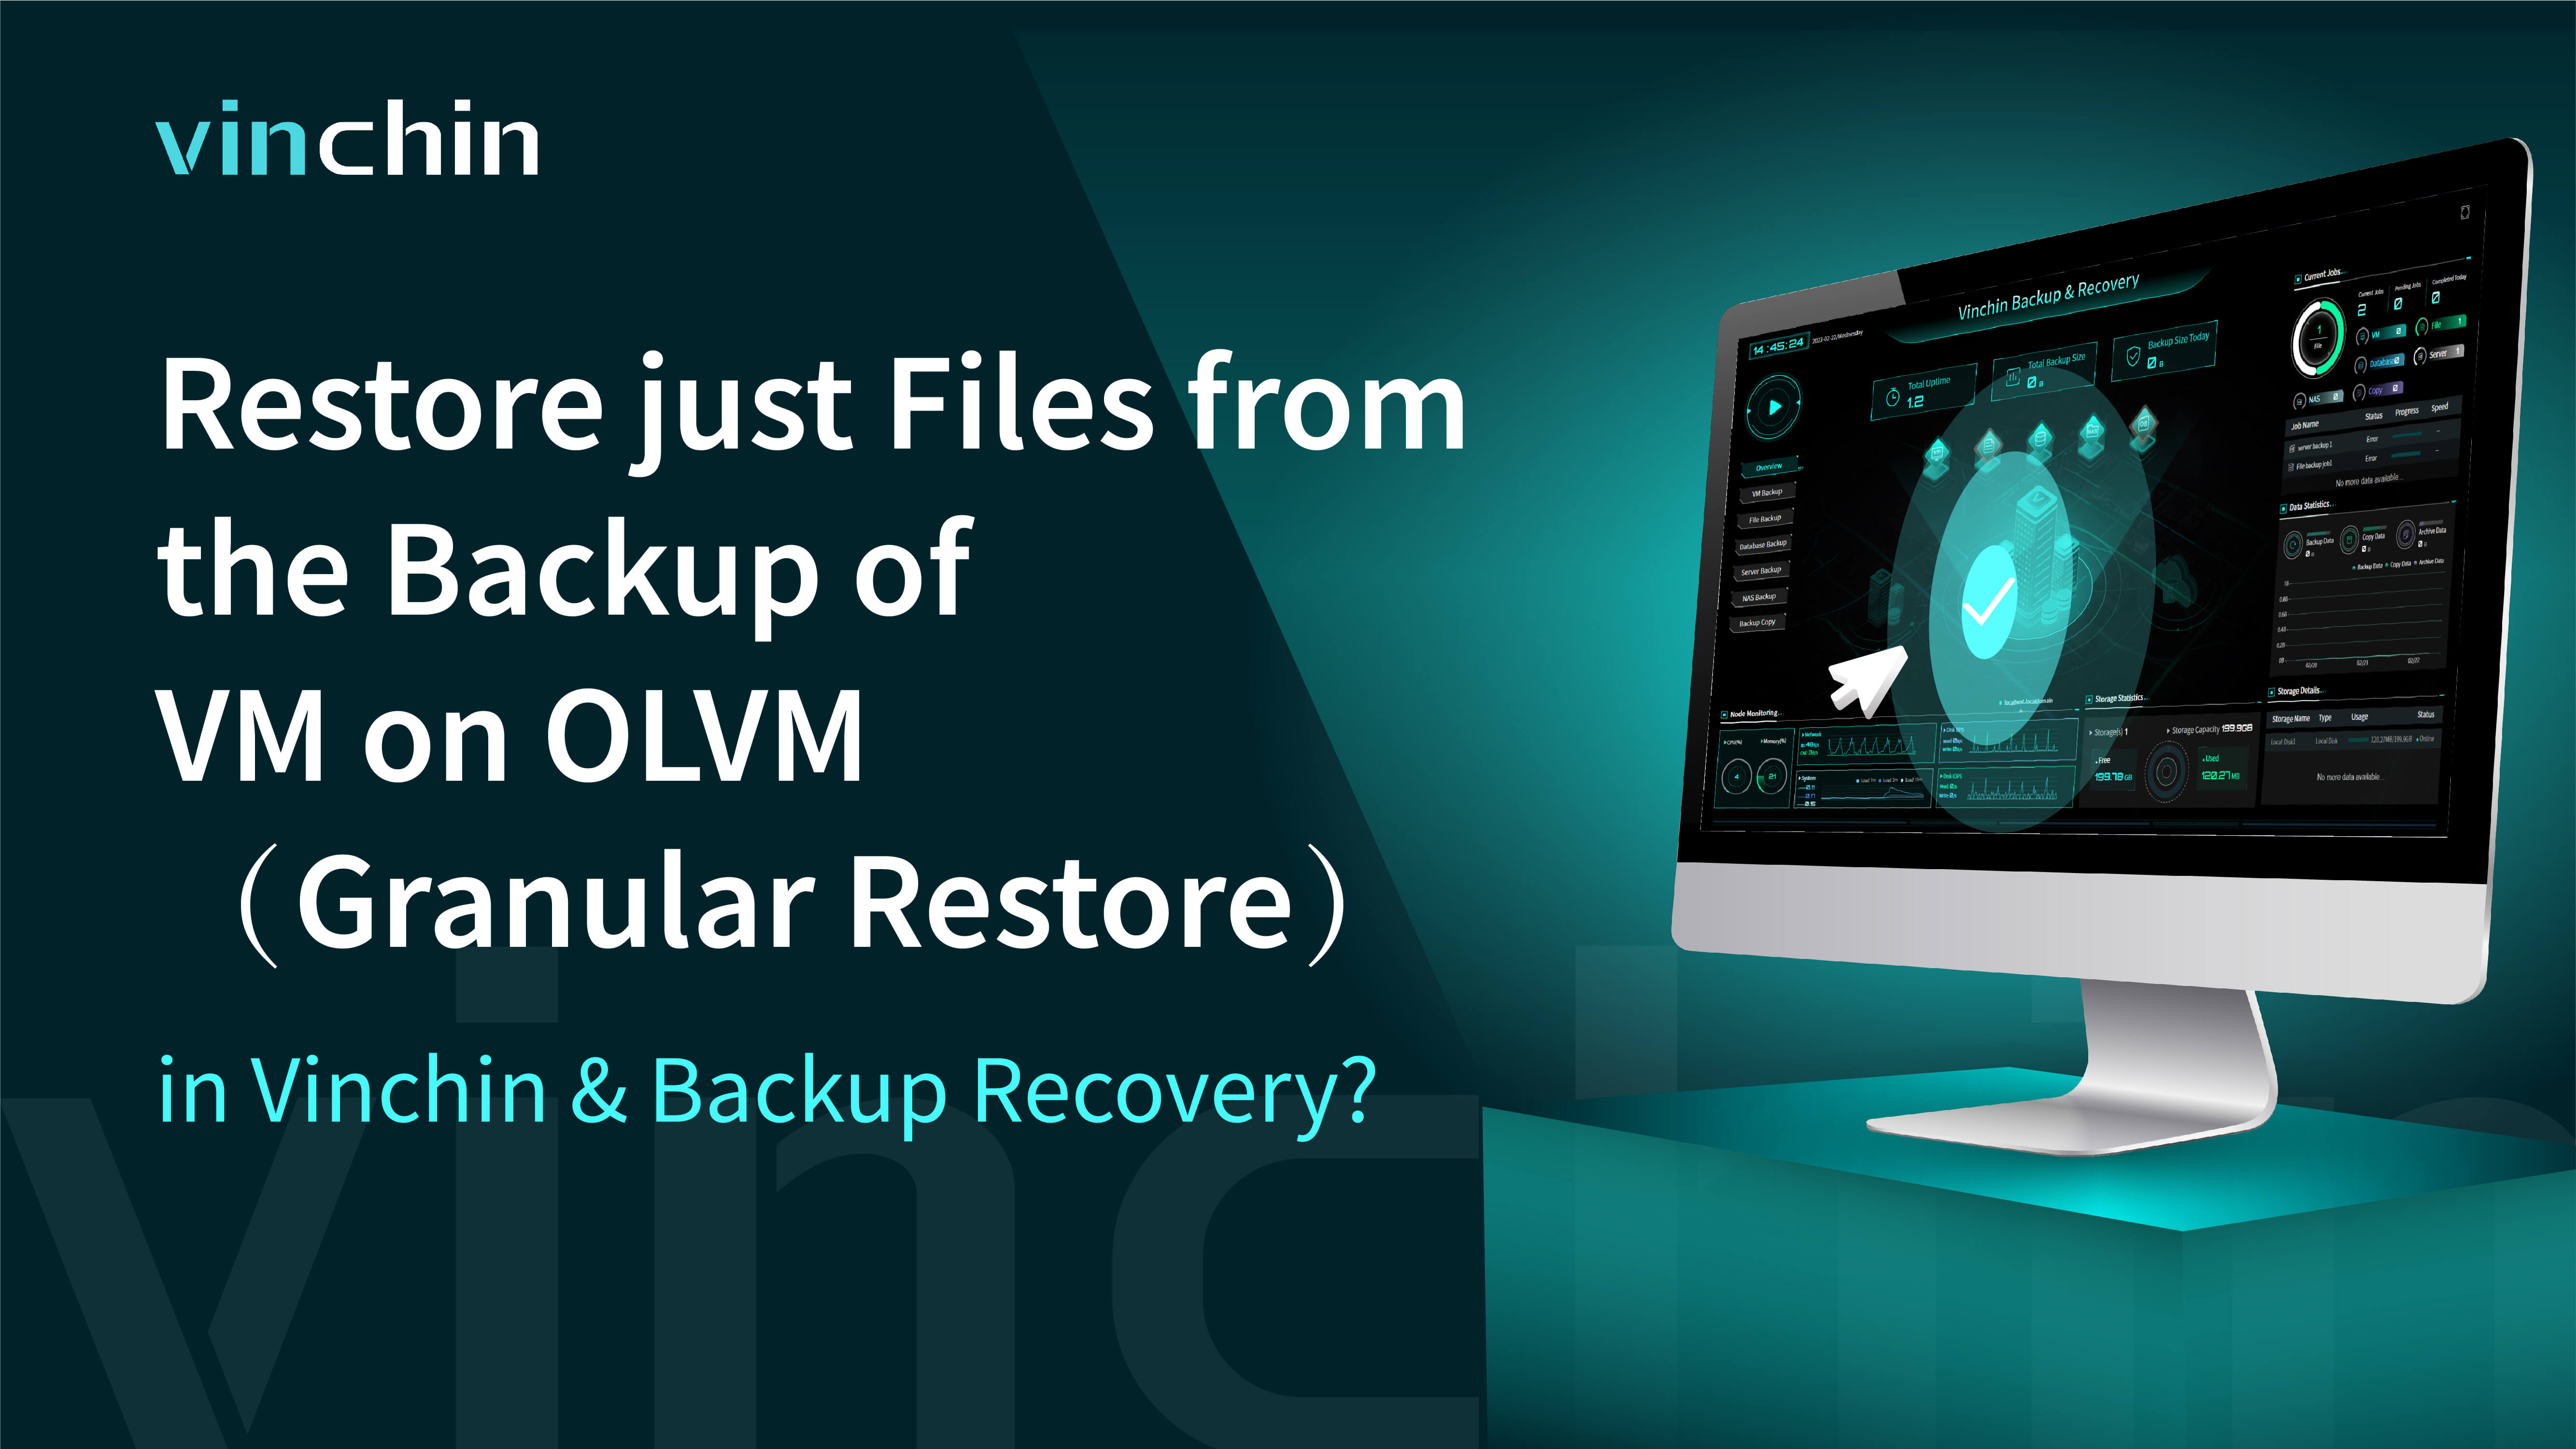 Use Granular Restore to Extract Files from OLVM Backup in Vinchin Backup & Recovery?